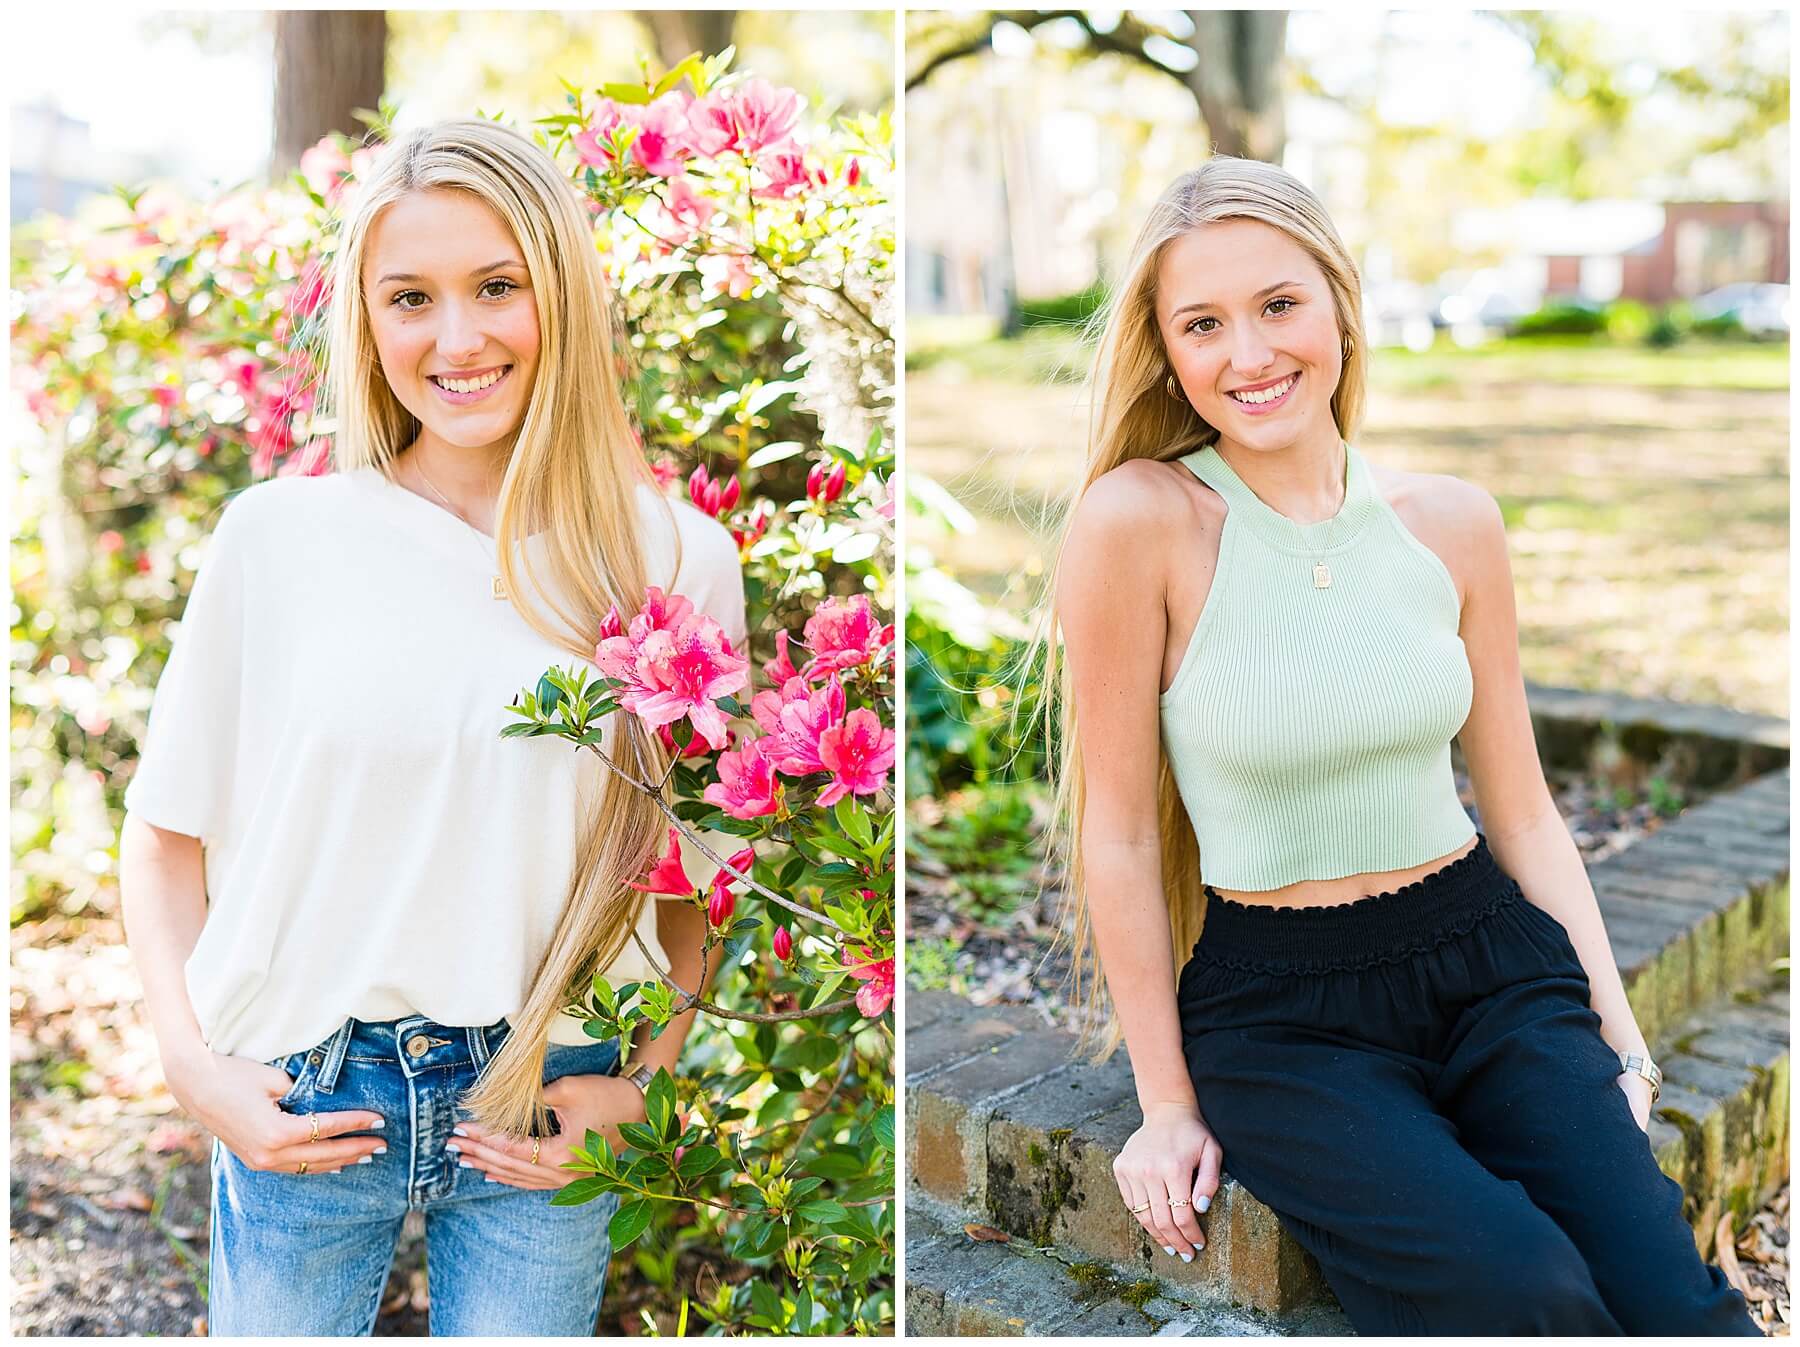 blonde girl in jeans and white shirt kneeling by pink azalea bust and blonde girl in green top and black pants sitting on brick planter in Downtown Savannah square